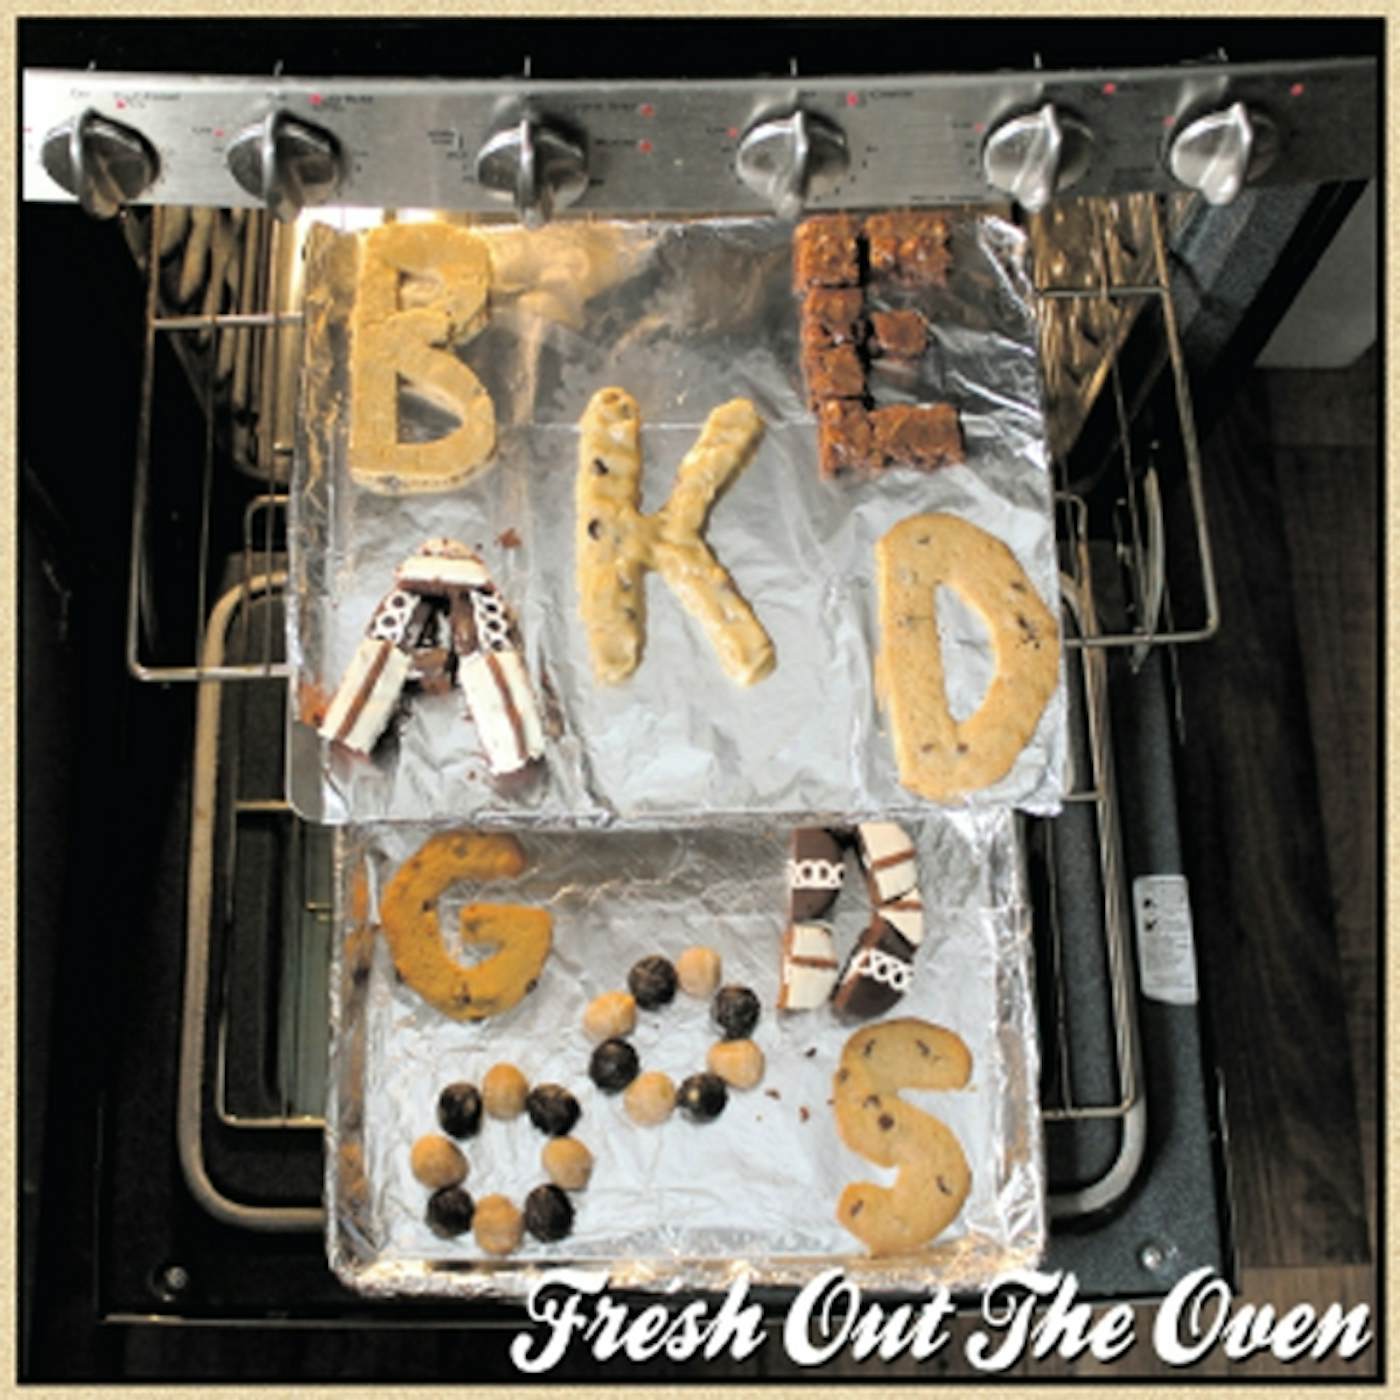 Baked Goods FRESH OUT OF THE OVEN CD